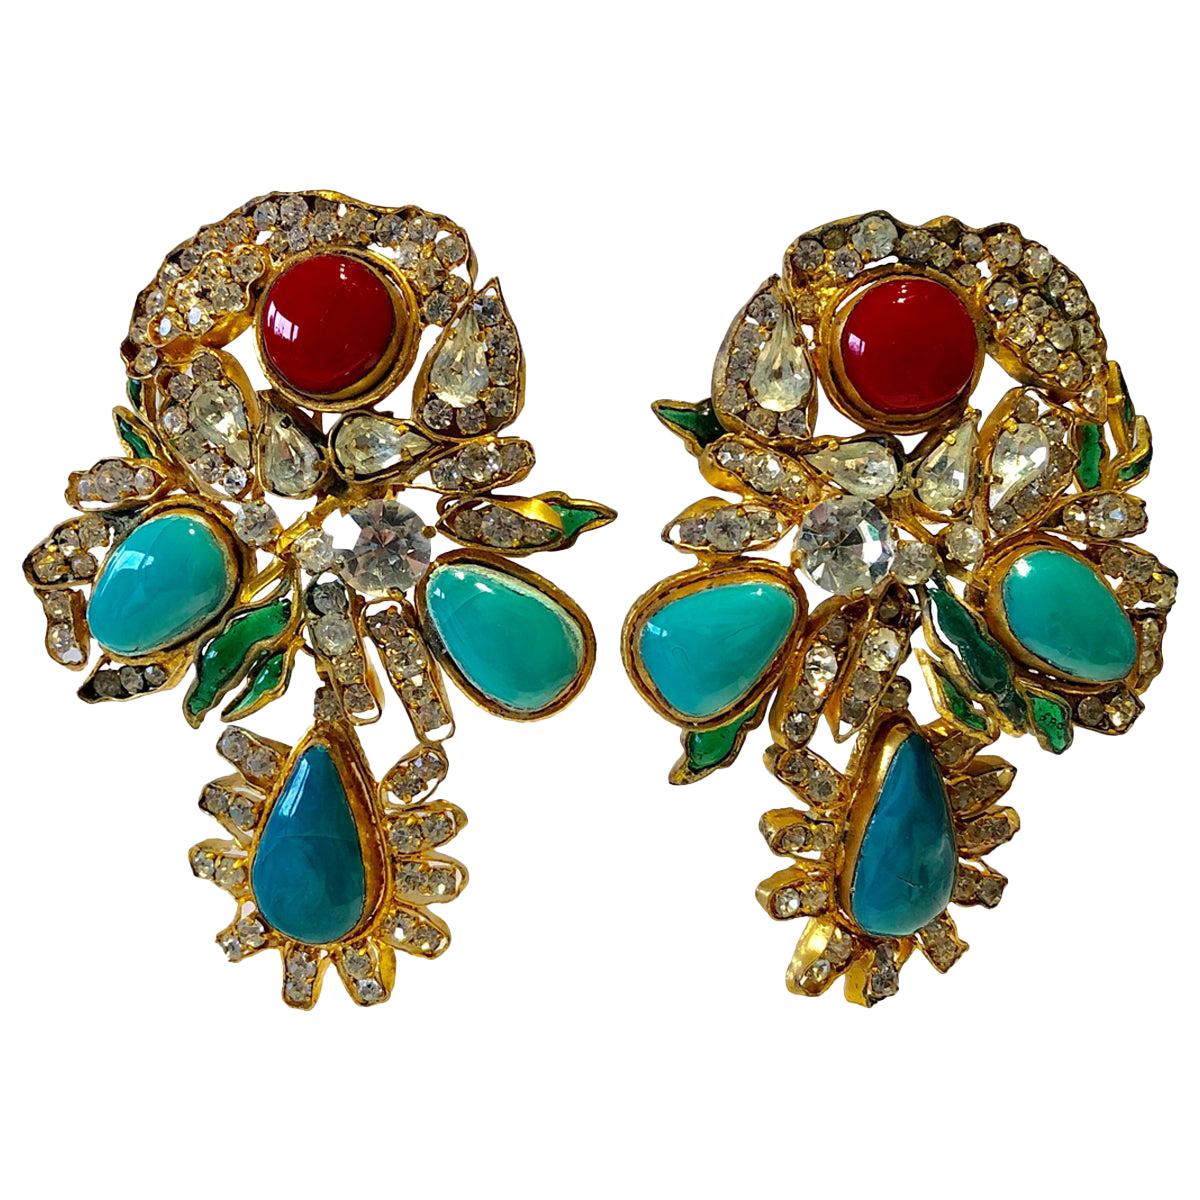 Vintage Yves Saint Laurent Haute Couture Mughal Statement Earrings 